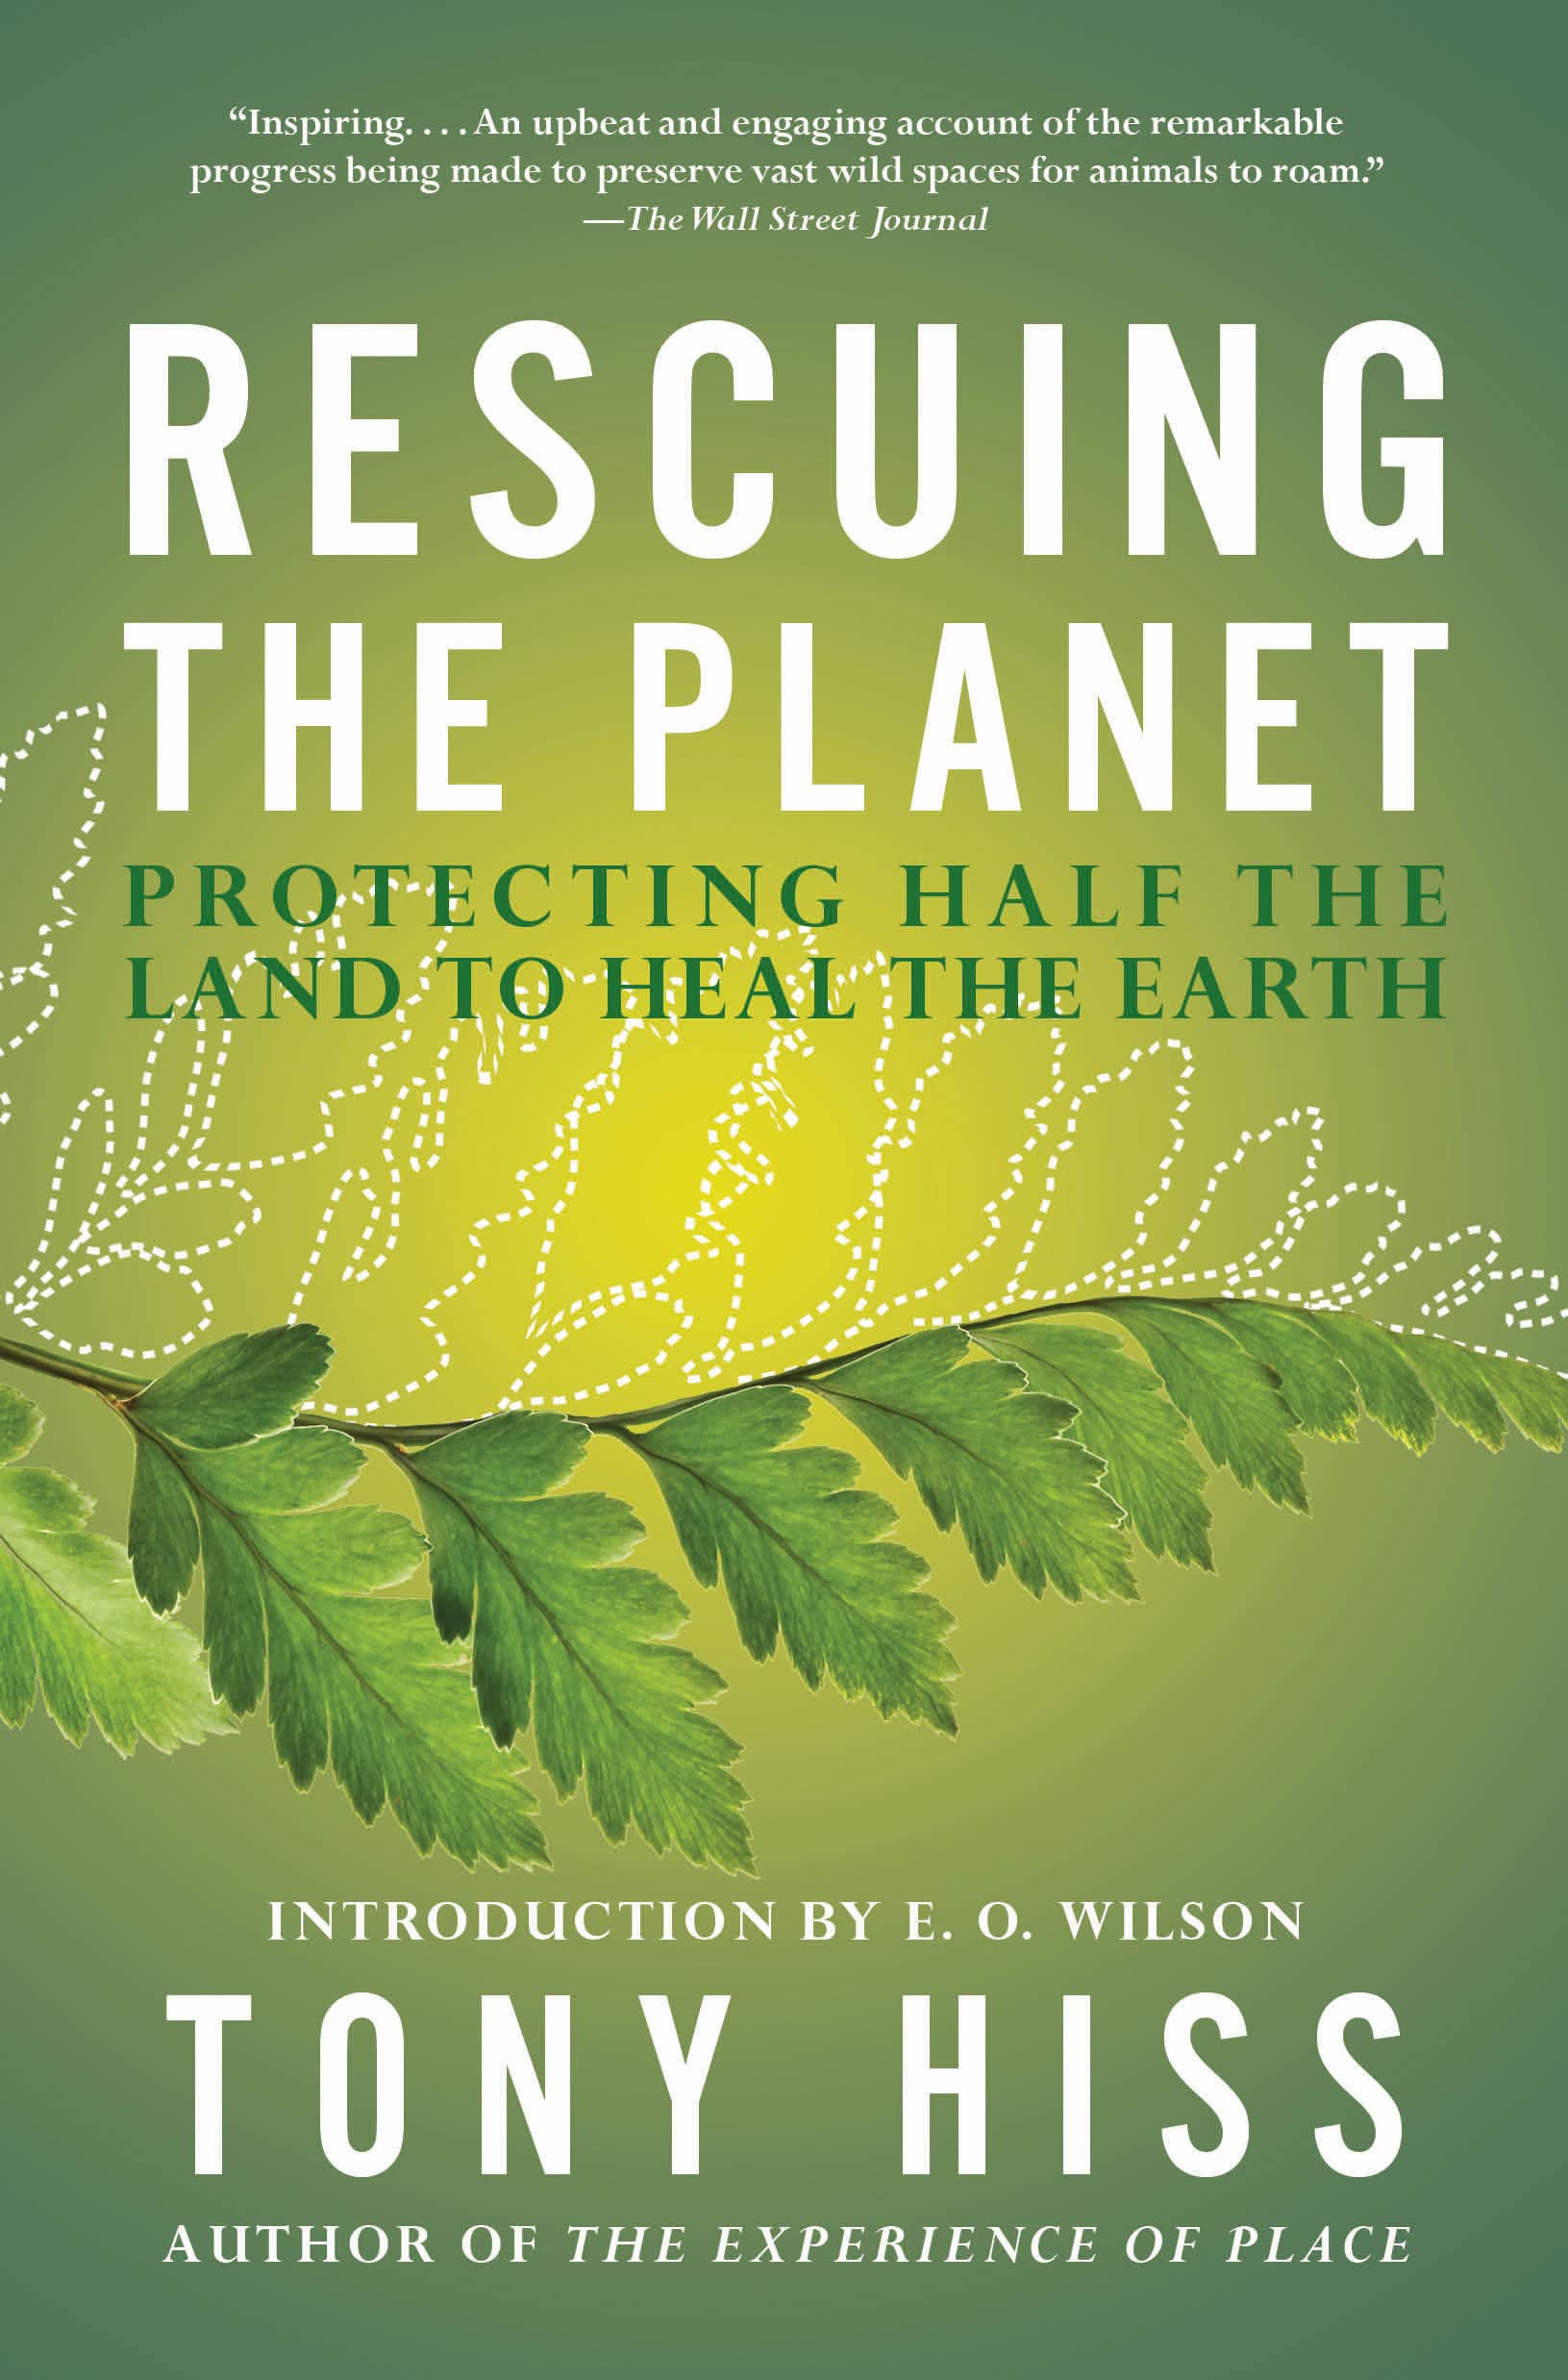 Rescuing the Planet book cover